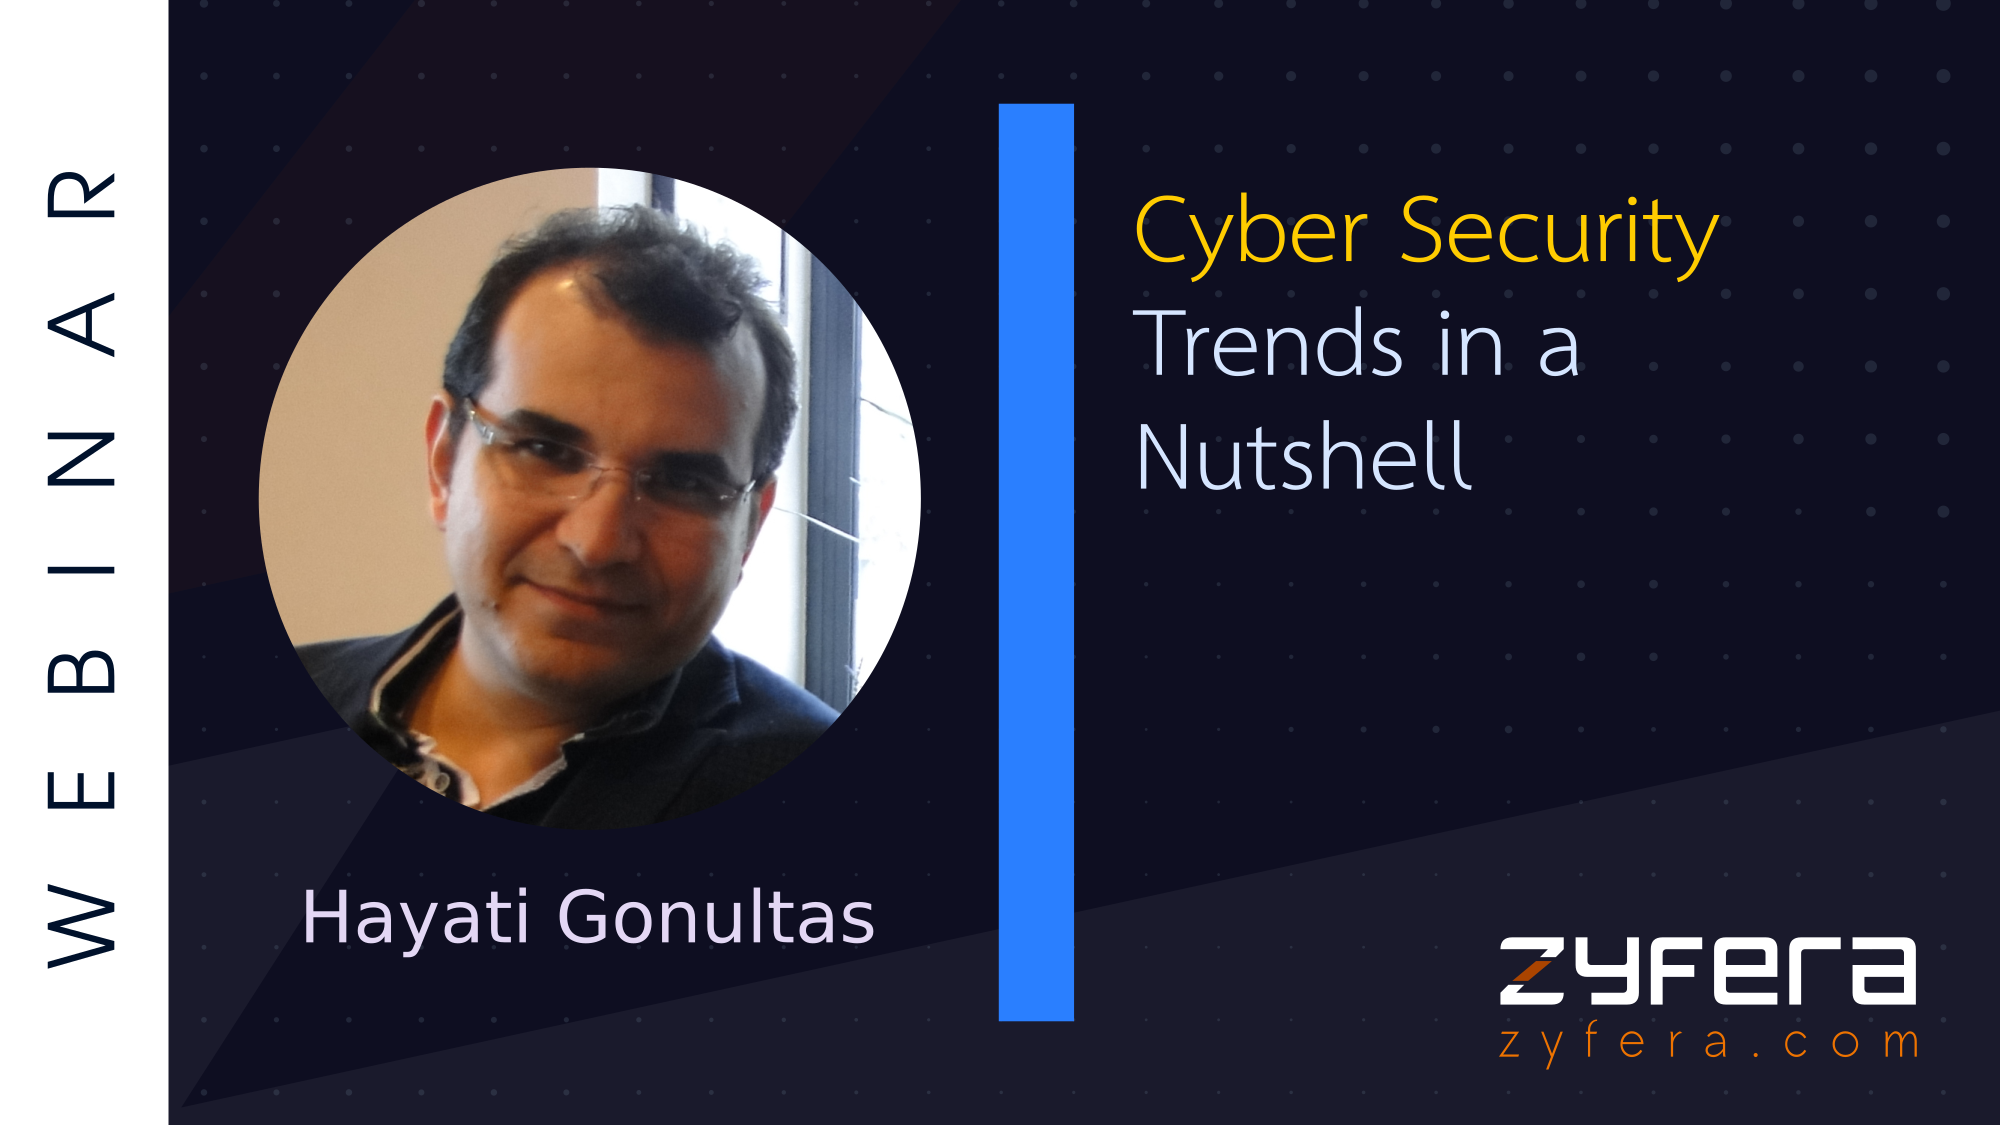 Cyber Security Trends in a Nutshell